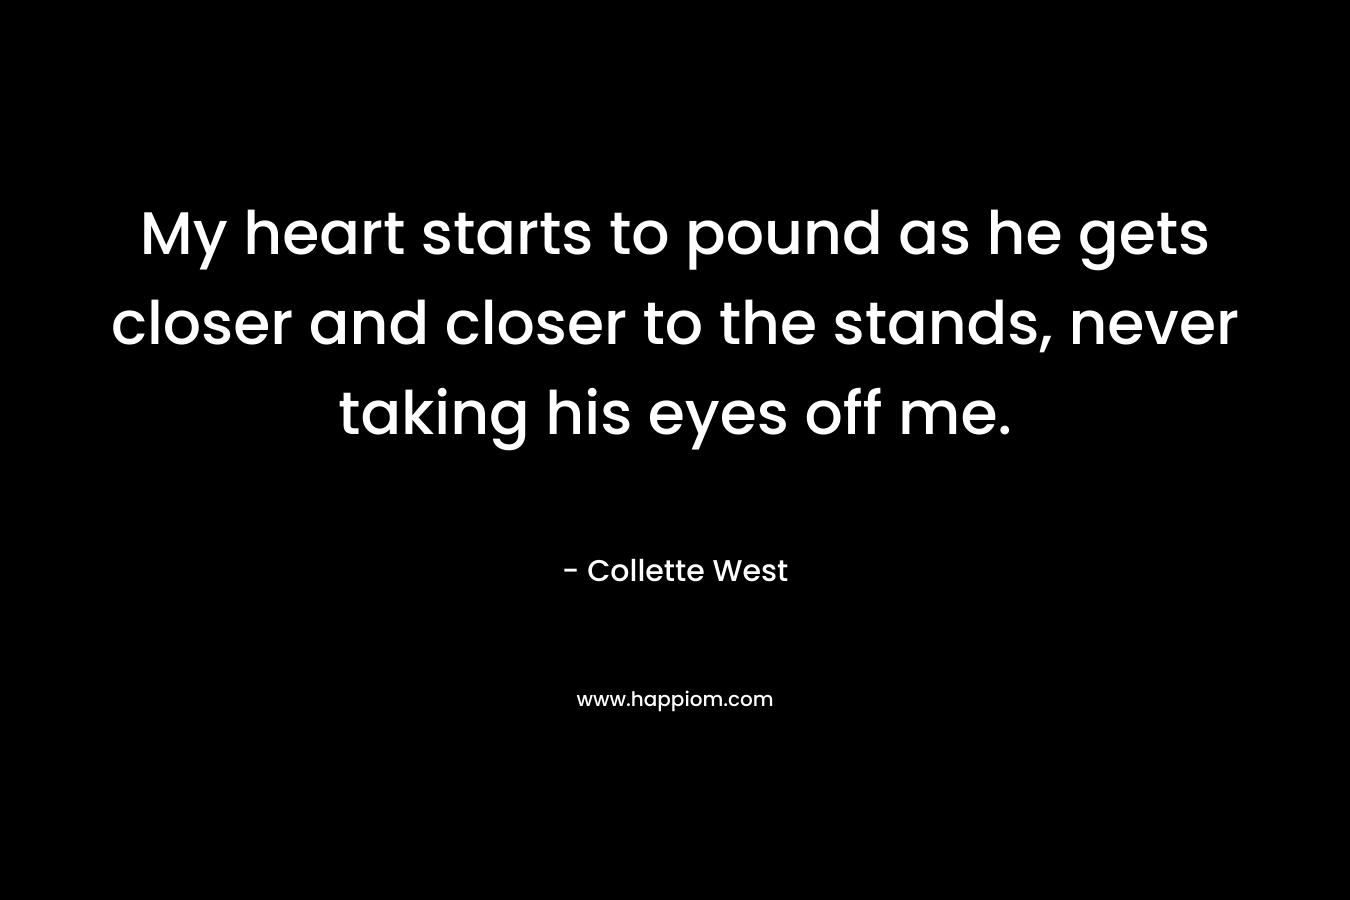 My heart starts to pound as he gets closer and closer to the stands, never taking his eyes off me. – Collette West